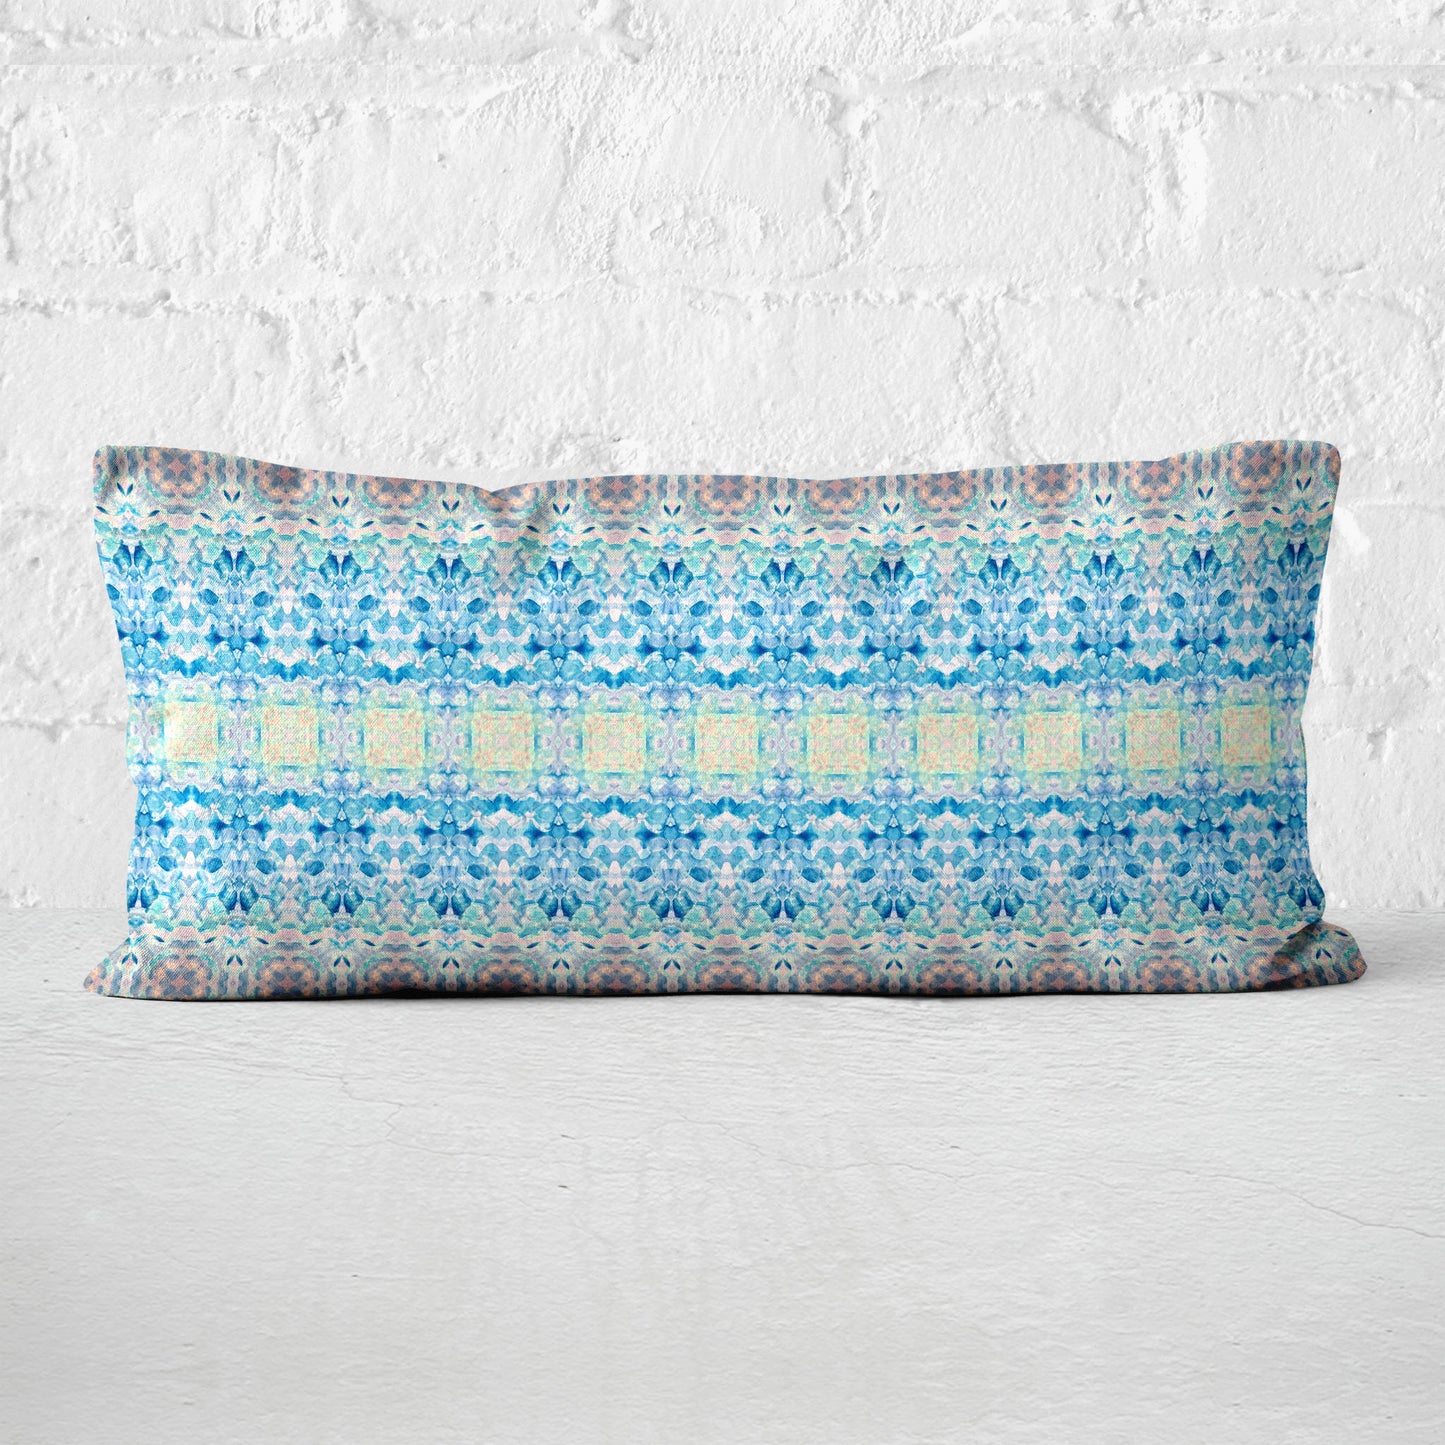 Rectangular lumbar pillow featuring a handpainted pattern in blue, pink, and yellow leaning against a white brick wall.